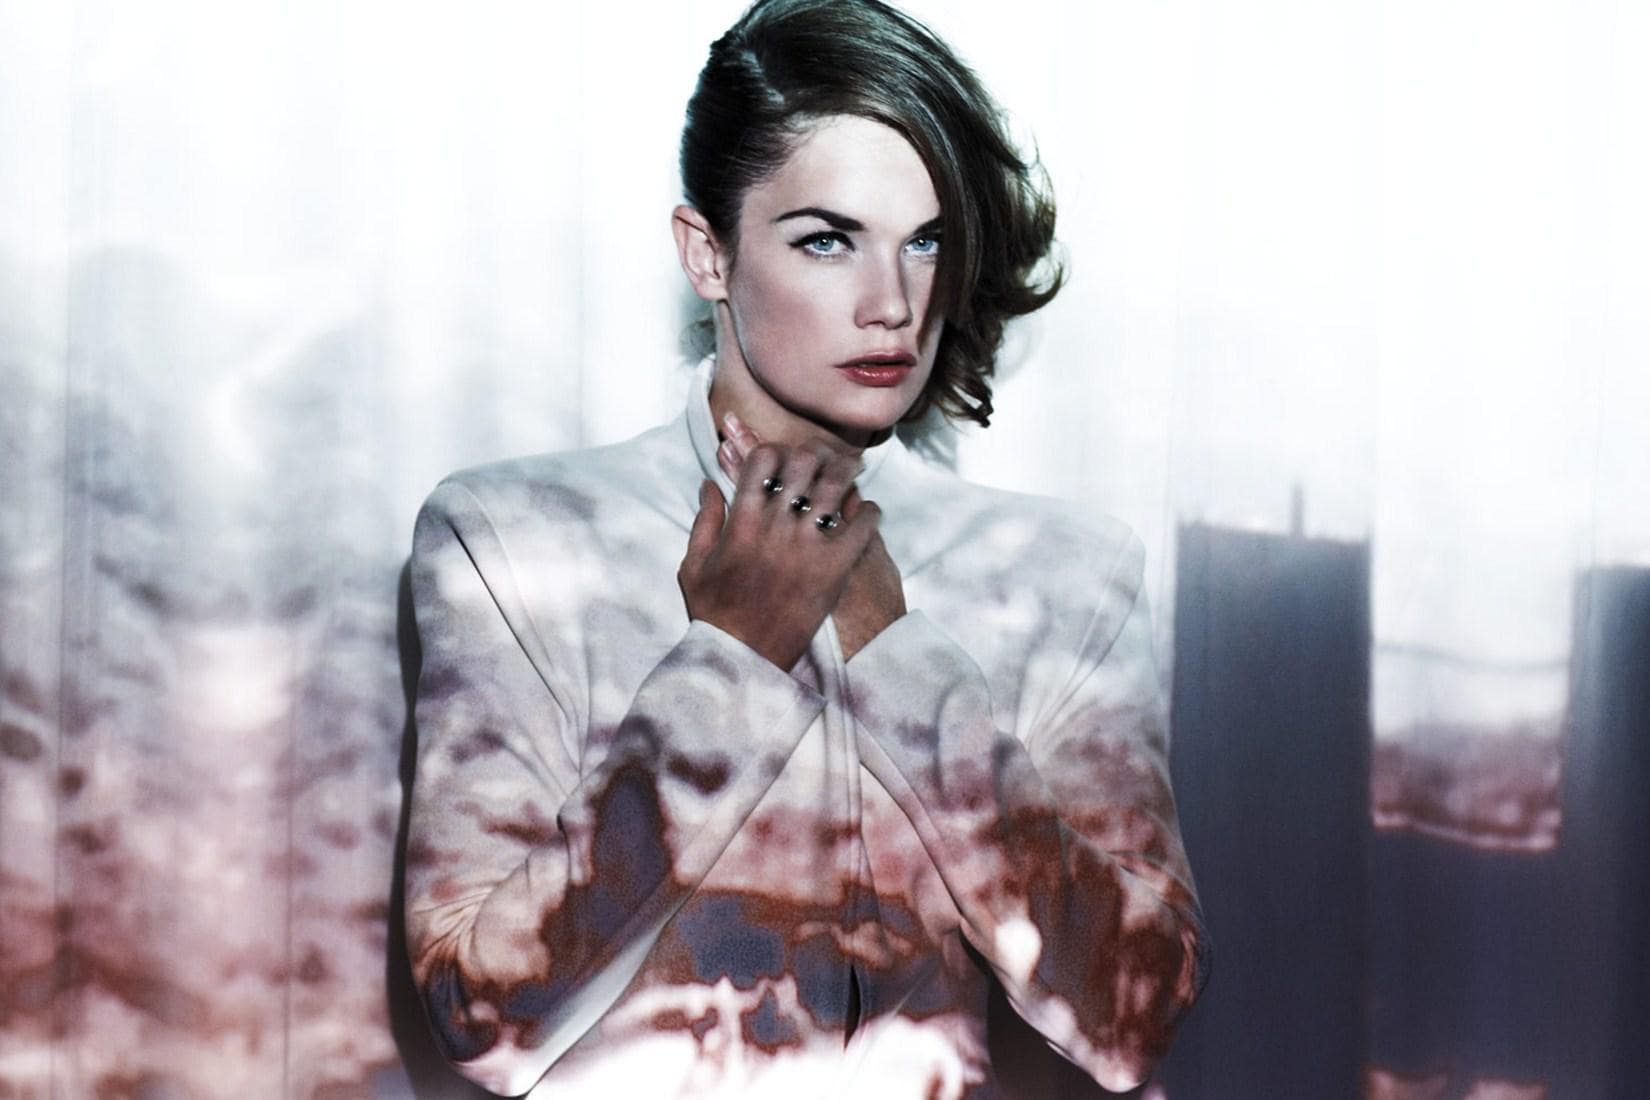 Hot Picture Of Ruth Wilson Will Make You Fall In With Her